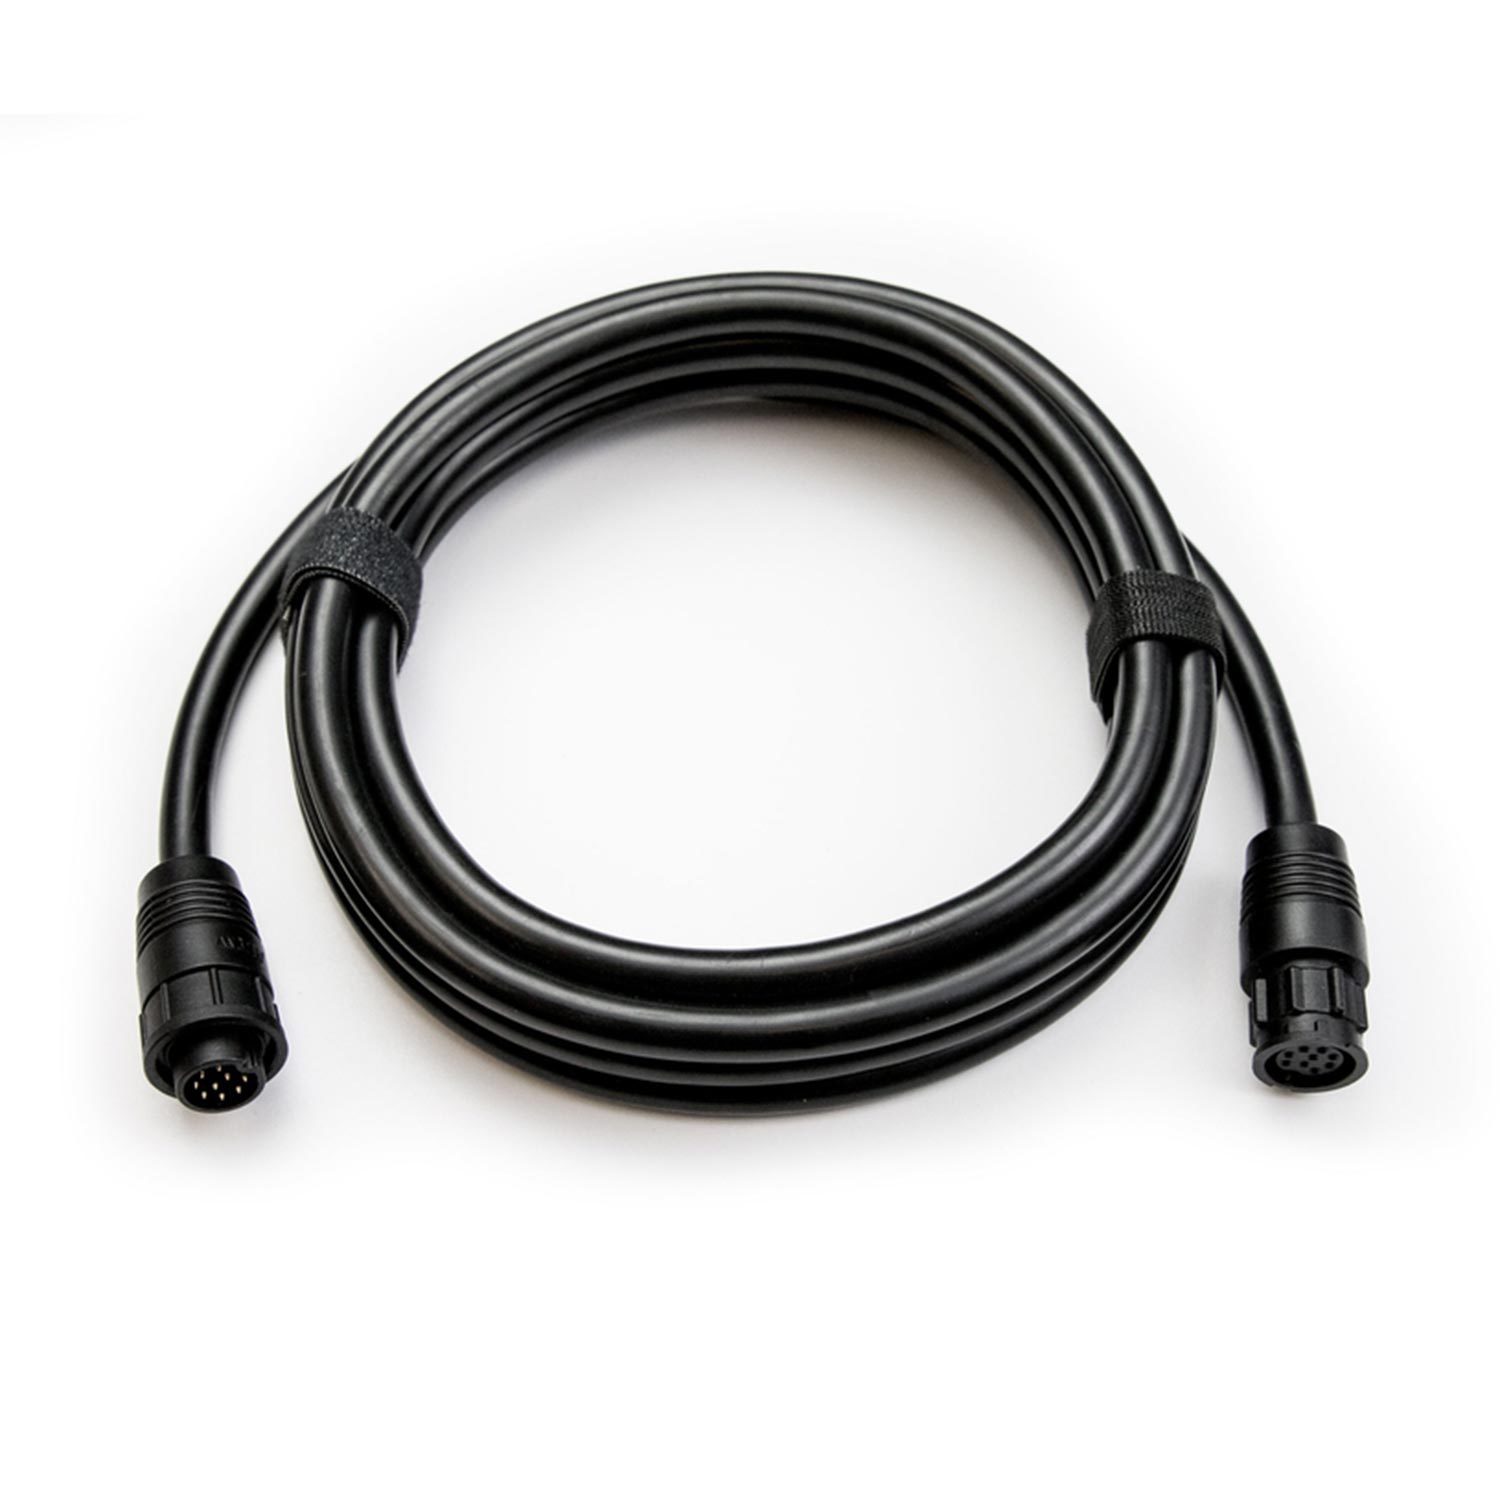 LOWRANCE 10' Extension Cable for StructureScan Transducer | West ...